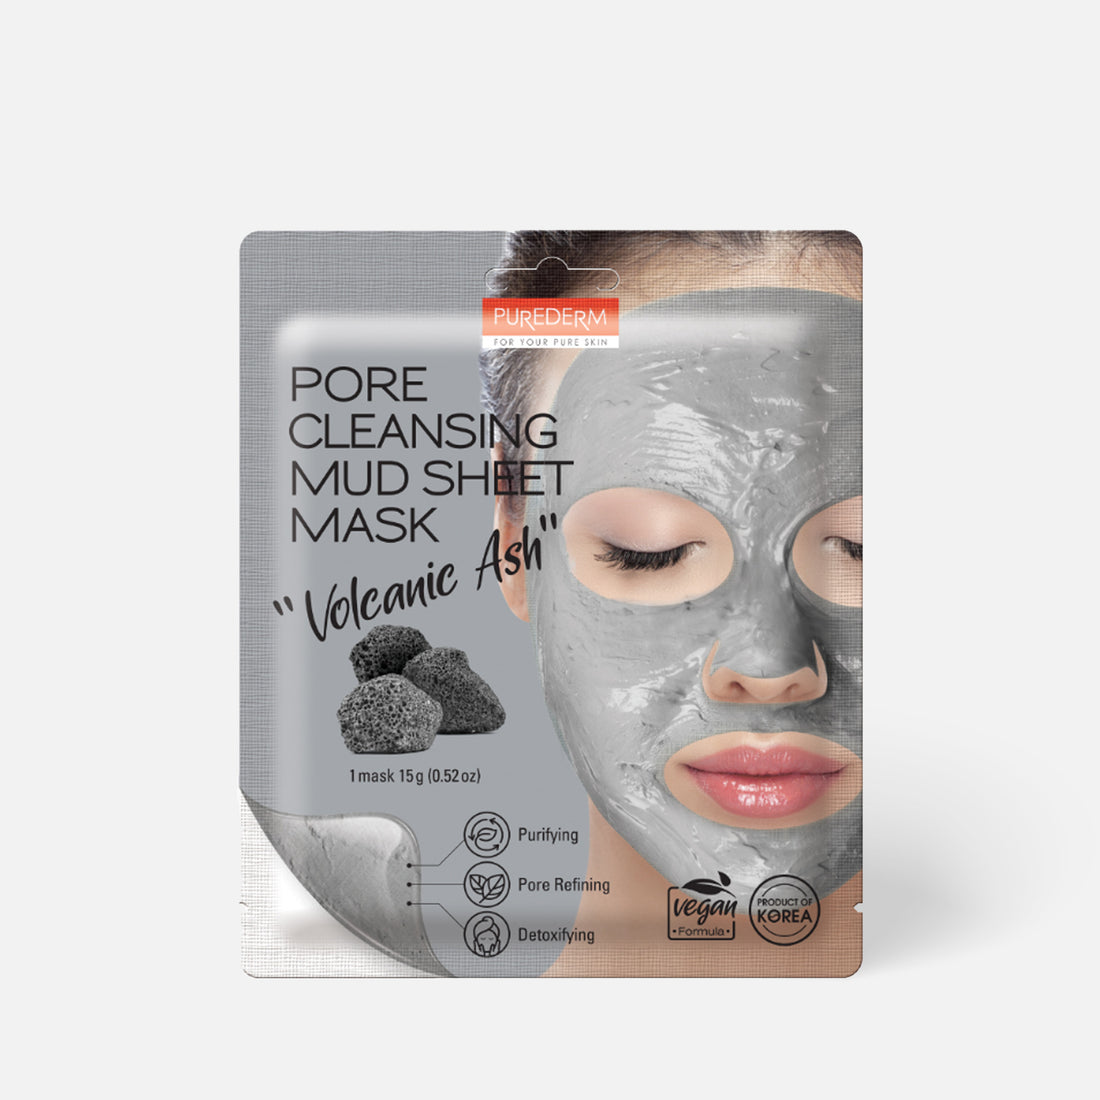 PUREDERM Pore Cleansing Mud Sheet Mask Volcanic Ash 15g